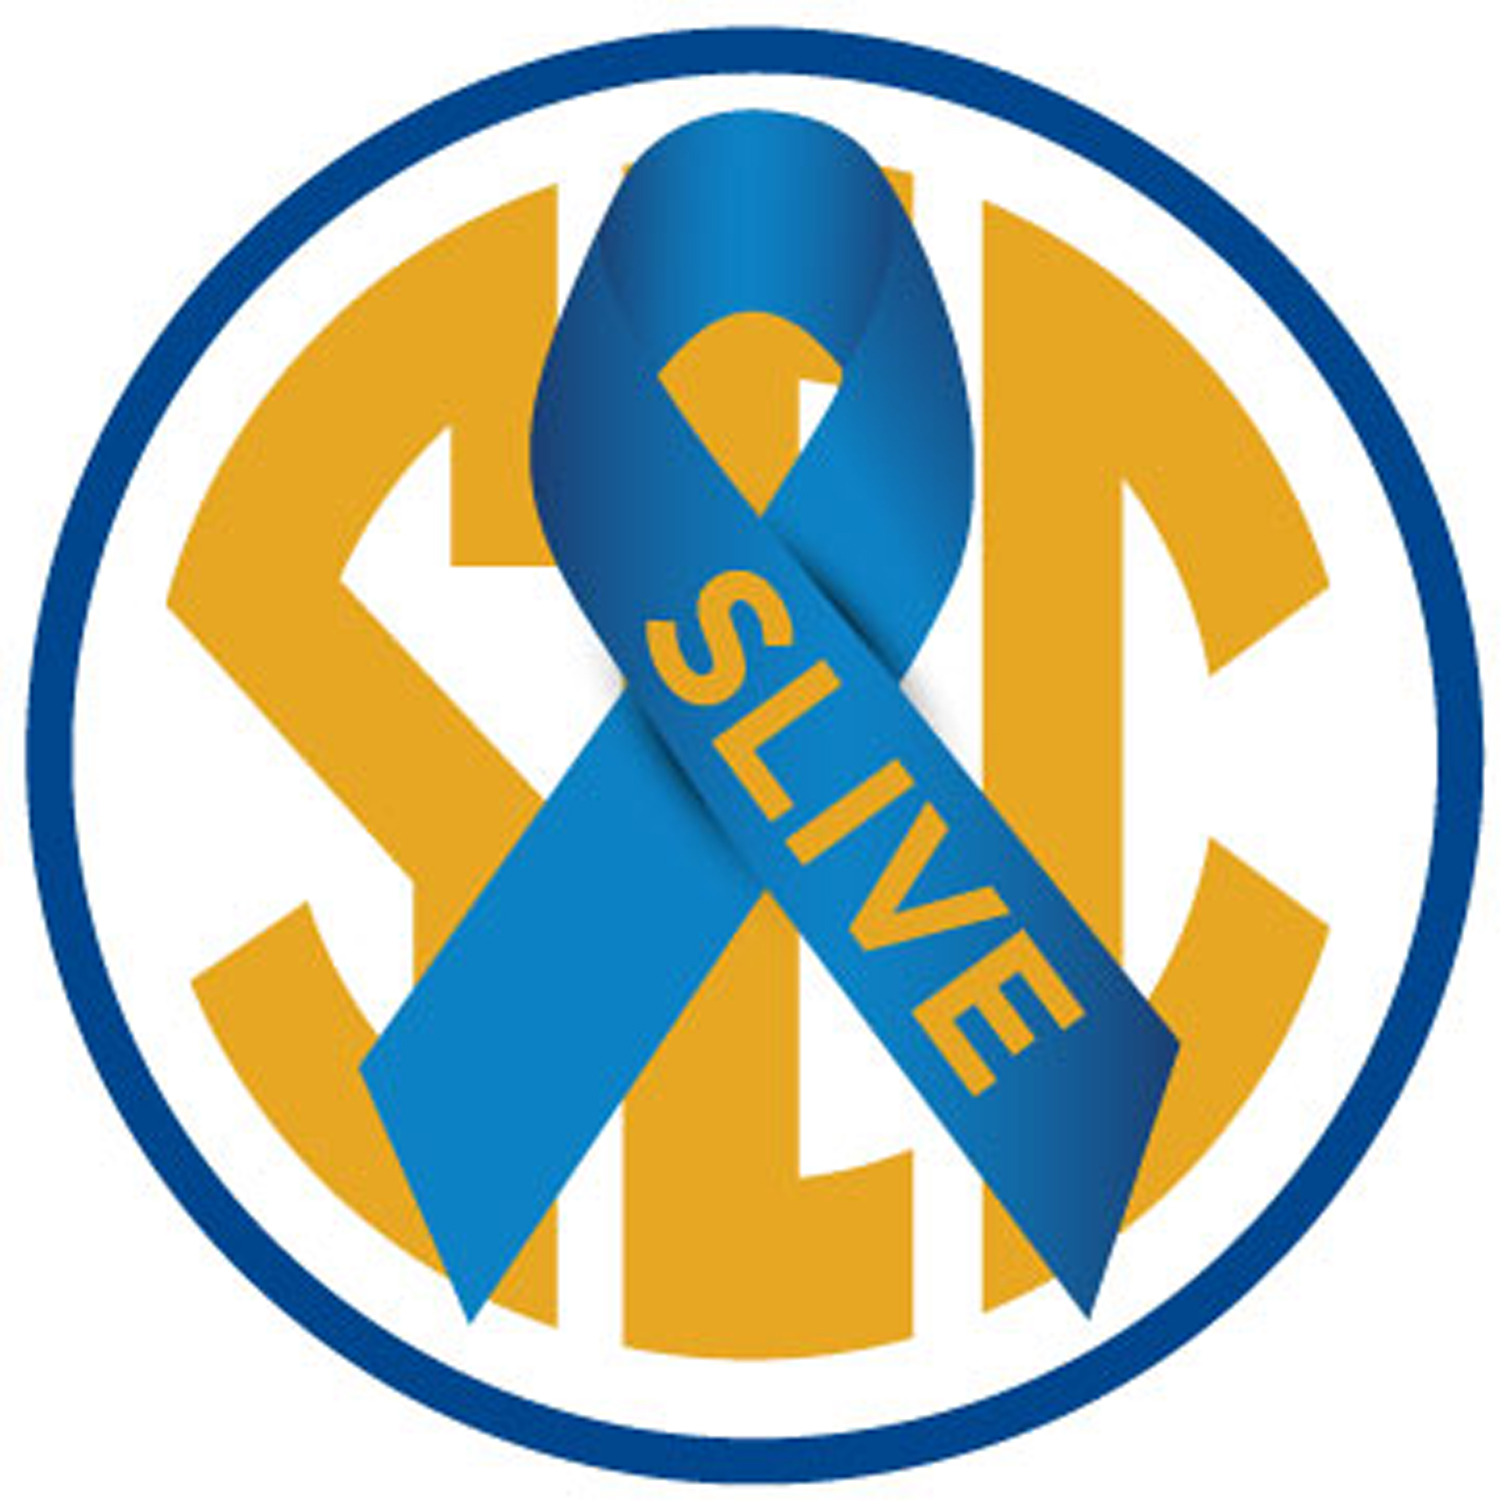 SEC Schools to Honor Mike Slive with Prostate Cancer Awareness Games